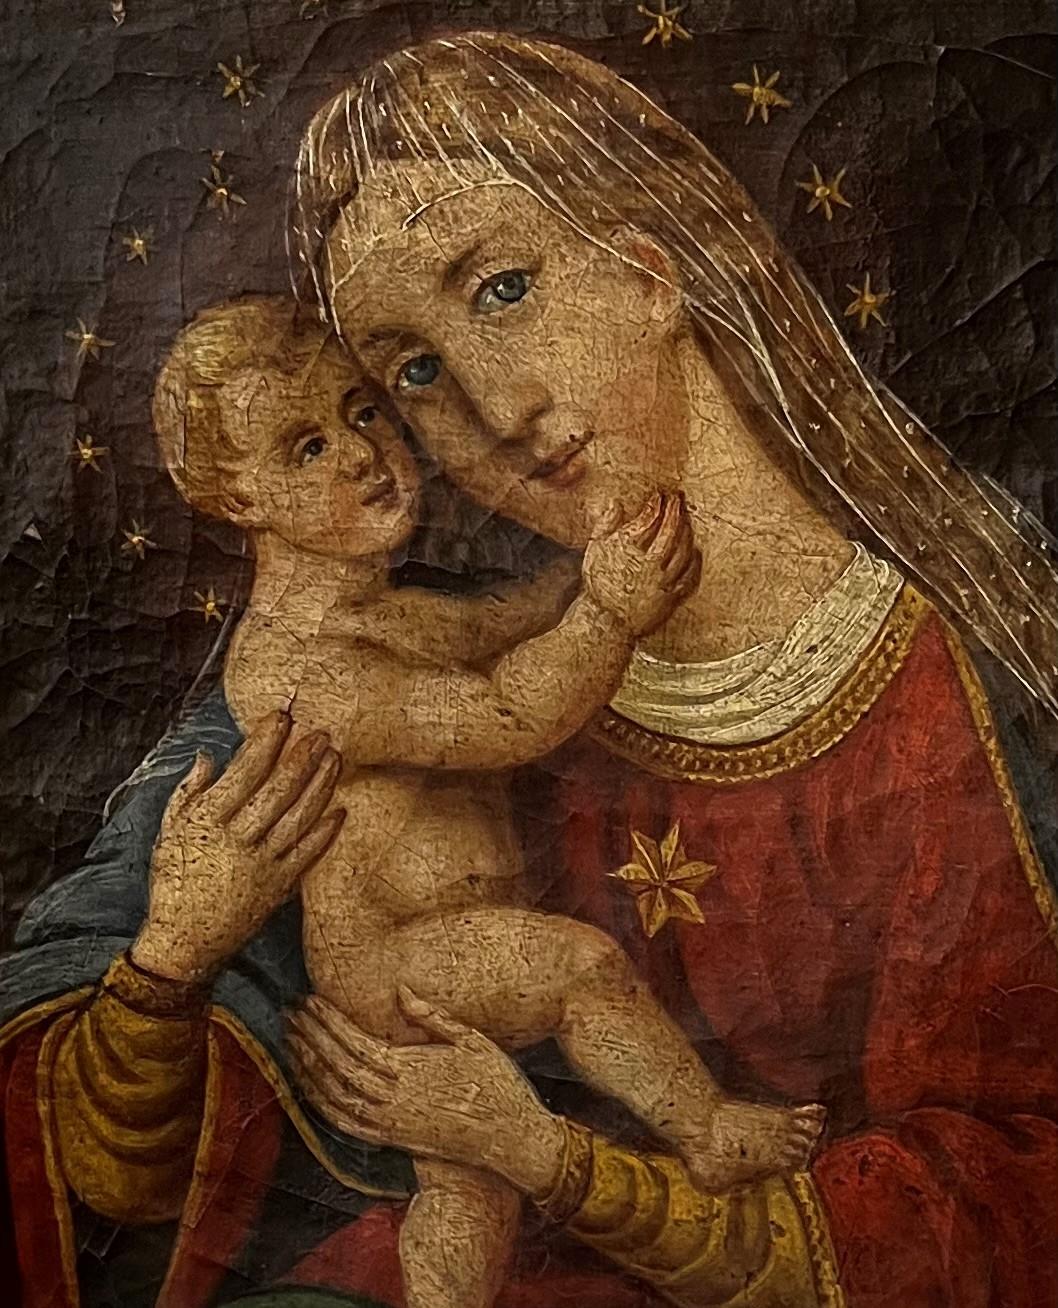 Over the centuries, in period known as Renaissance, more than several painters all over Europe were fascinated by the theme based upon similar subject with Mother and the Child as main figures. 

This stunning Madonna with Child oil on canvas